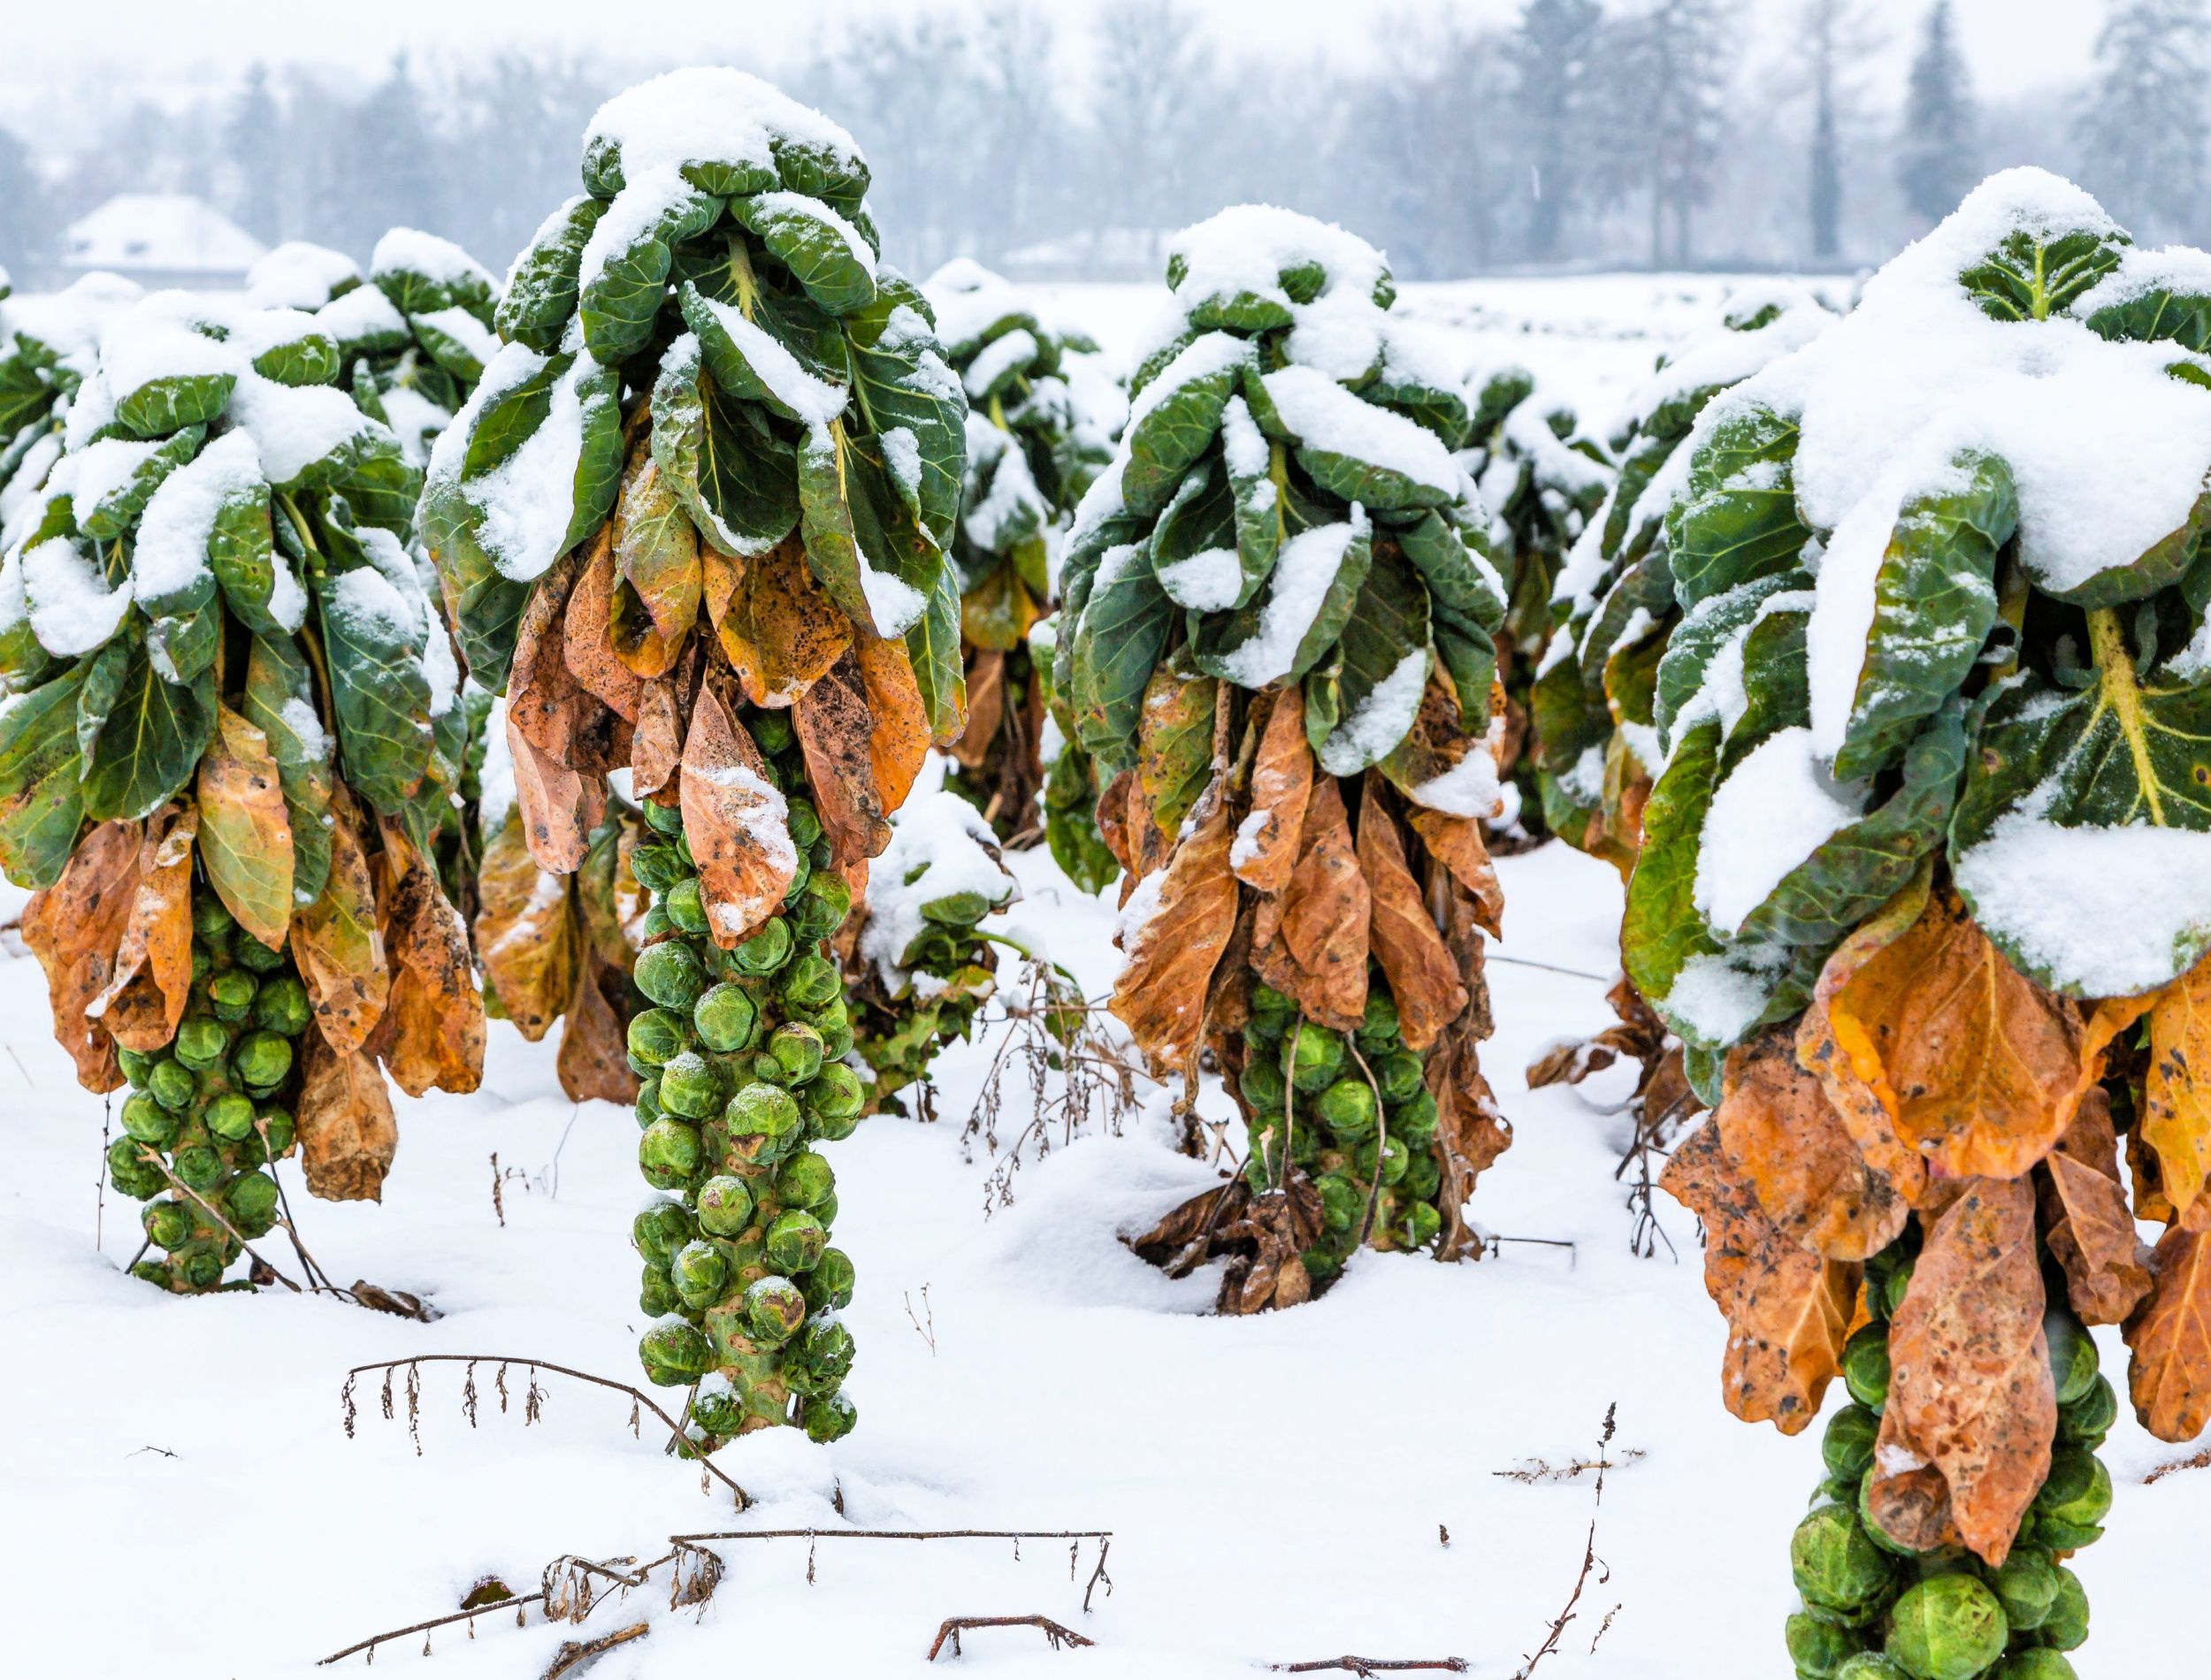 Snow covered brussels sprouts on a field in winter